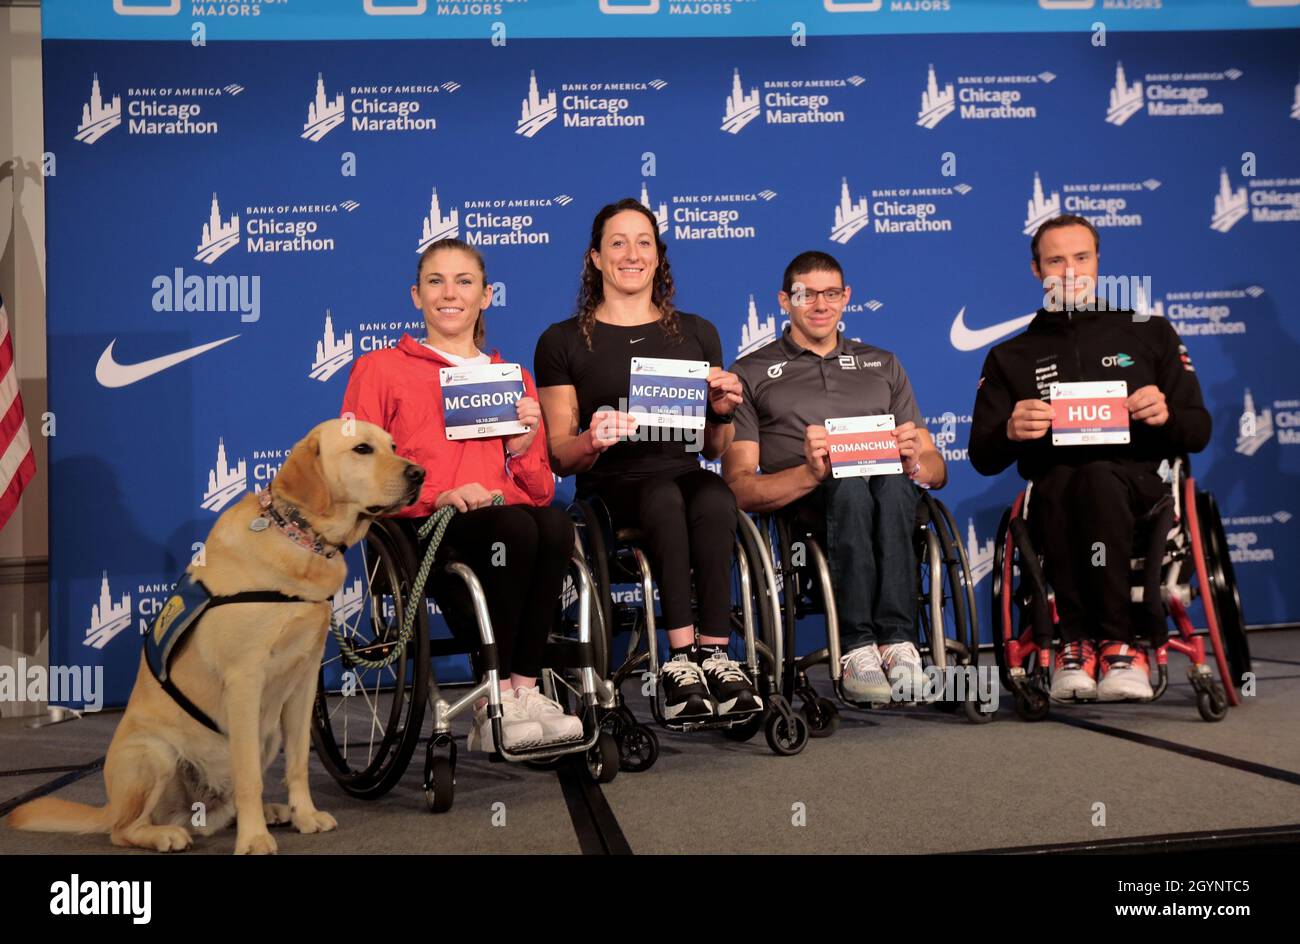 Chicago, Illinois, USA. 8th Oct, 2021. Bank of America Chicago Marathon Elite wheelchair athletes (left) AMANDA MCGRORY (United States) with her service dog, TATYANA MCFADDEN (United States), DANIEL ROMANCHUK (United States), and MARCEL HUG (Switzerland) hold their racing bibs Friday October 8, 2021 after a press conference at the Hilton Chicago. (Credit Image: © Pat A. Robinson/ZUMA Press Wire) Credit: ZUMA Press, Inc./Alamy Live News Stock Photo